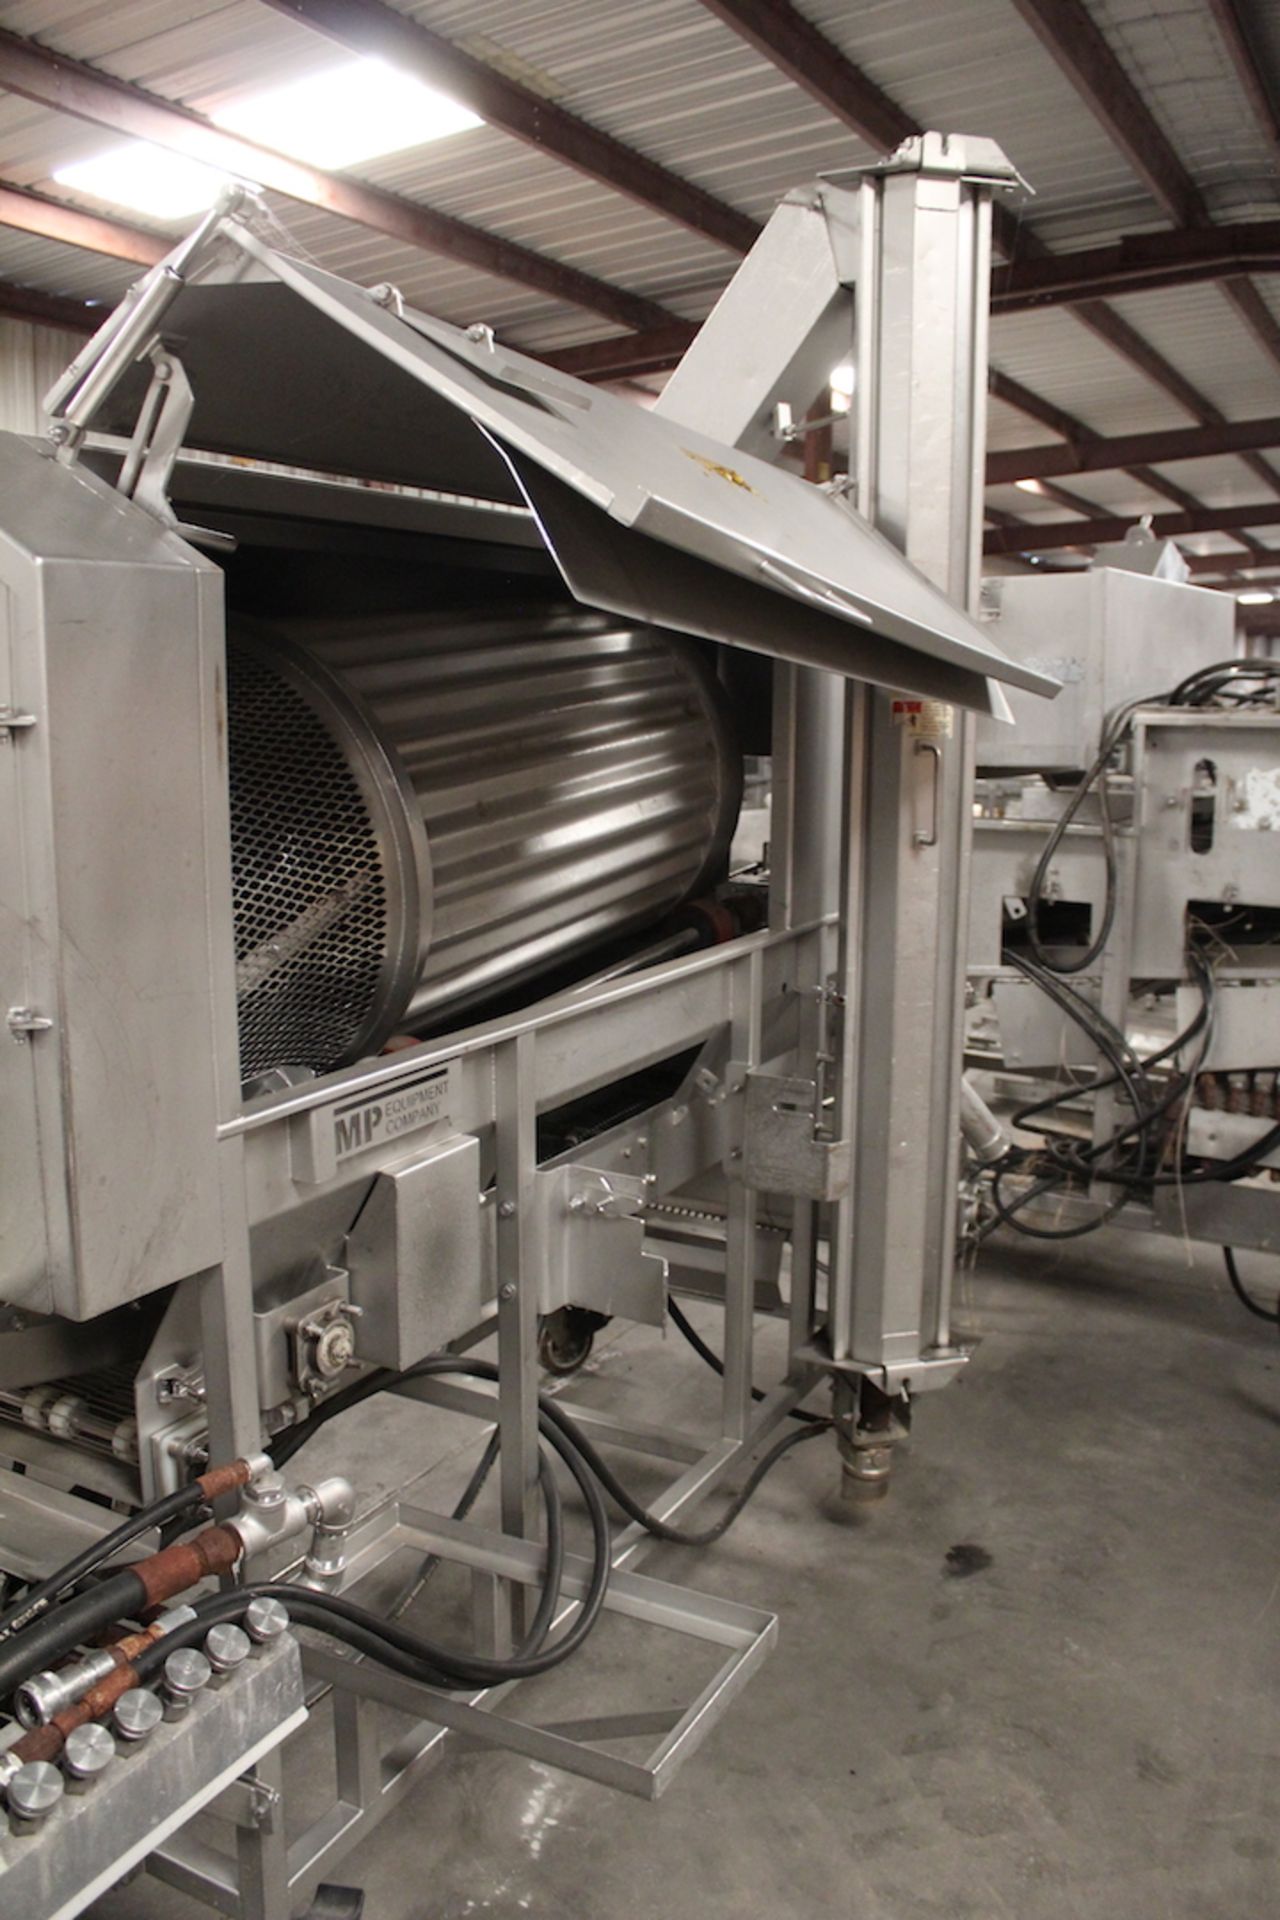 MP Equipment Drum Breader, Located in: Siloam Springs, AR - Image 2 of 5